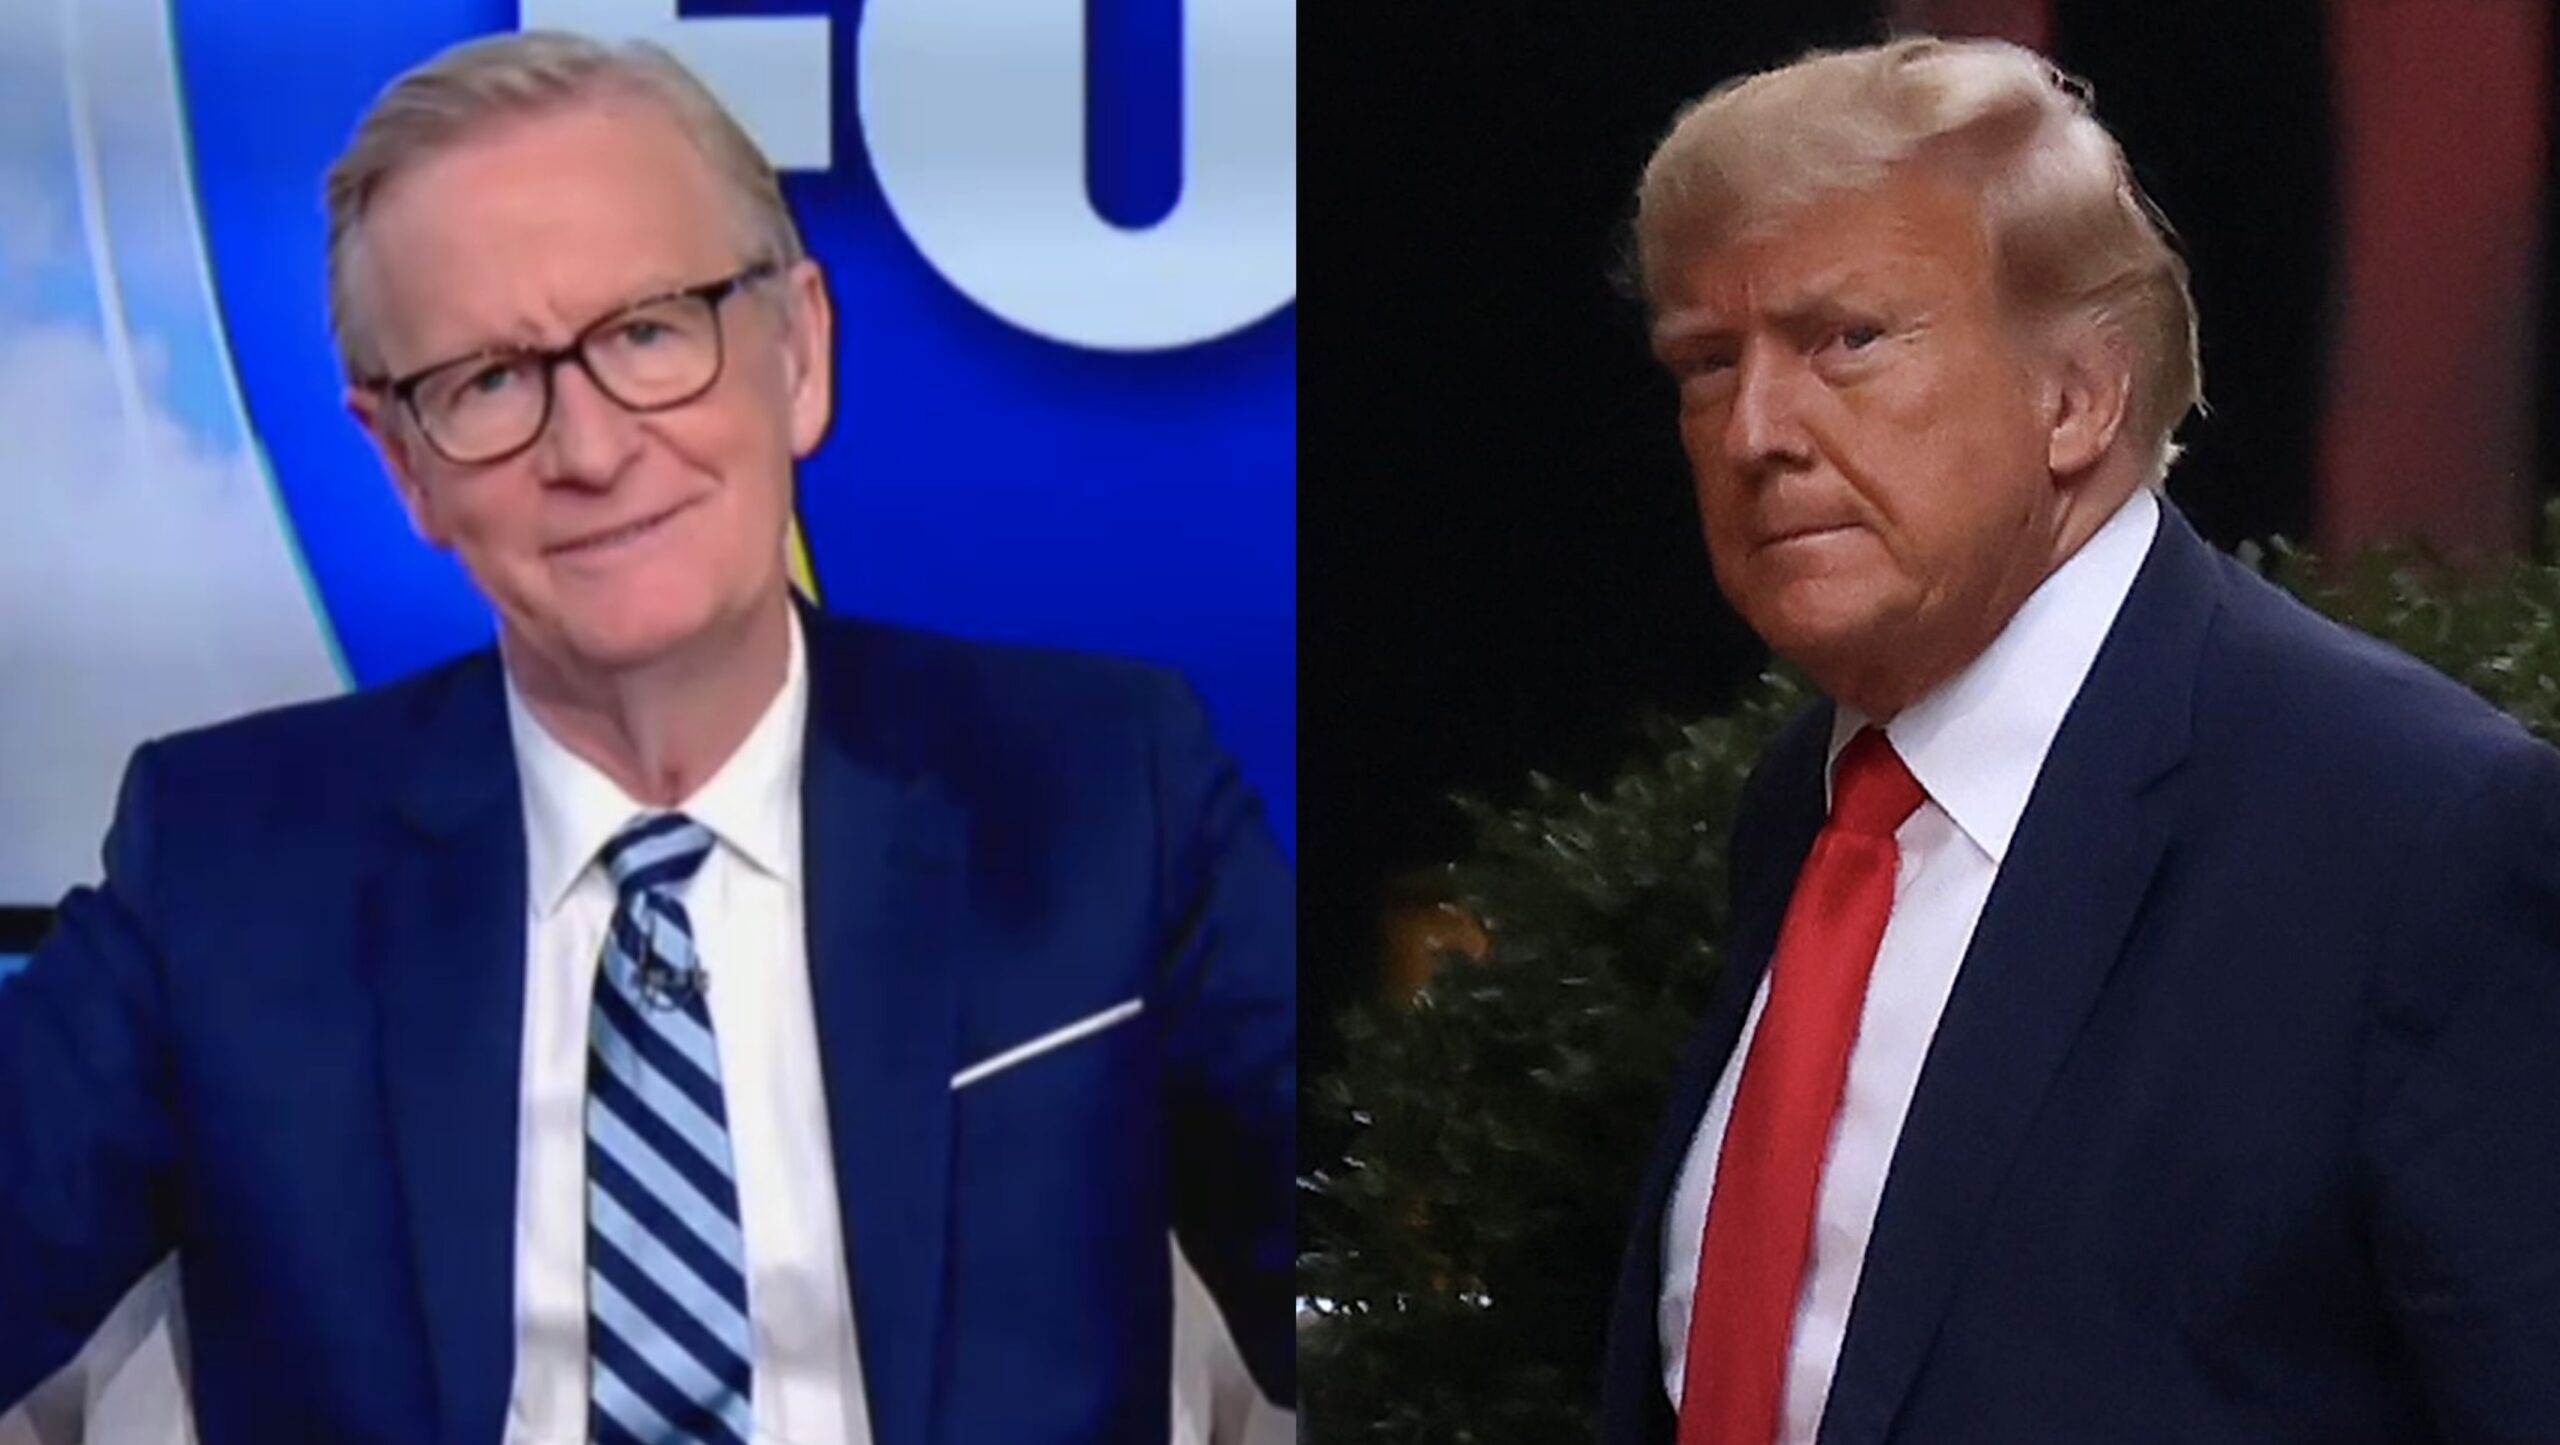 Trump Loses It On Fox News Host Steve Doocy For Fact-Checking His False Election Claim: ‘Unwatchable’